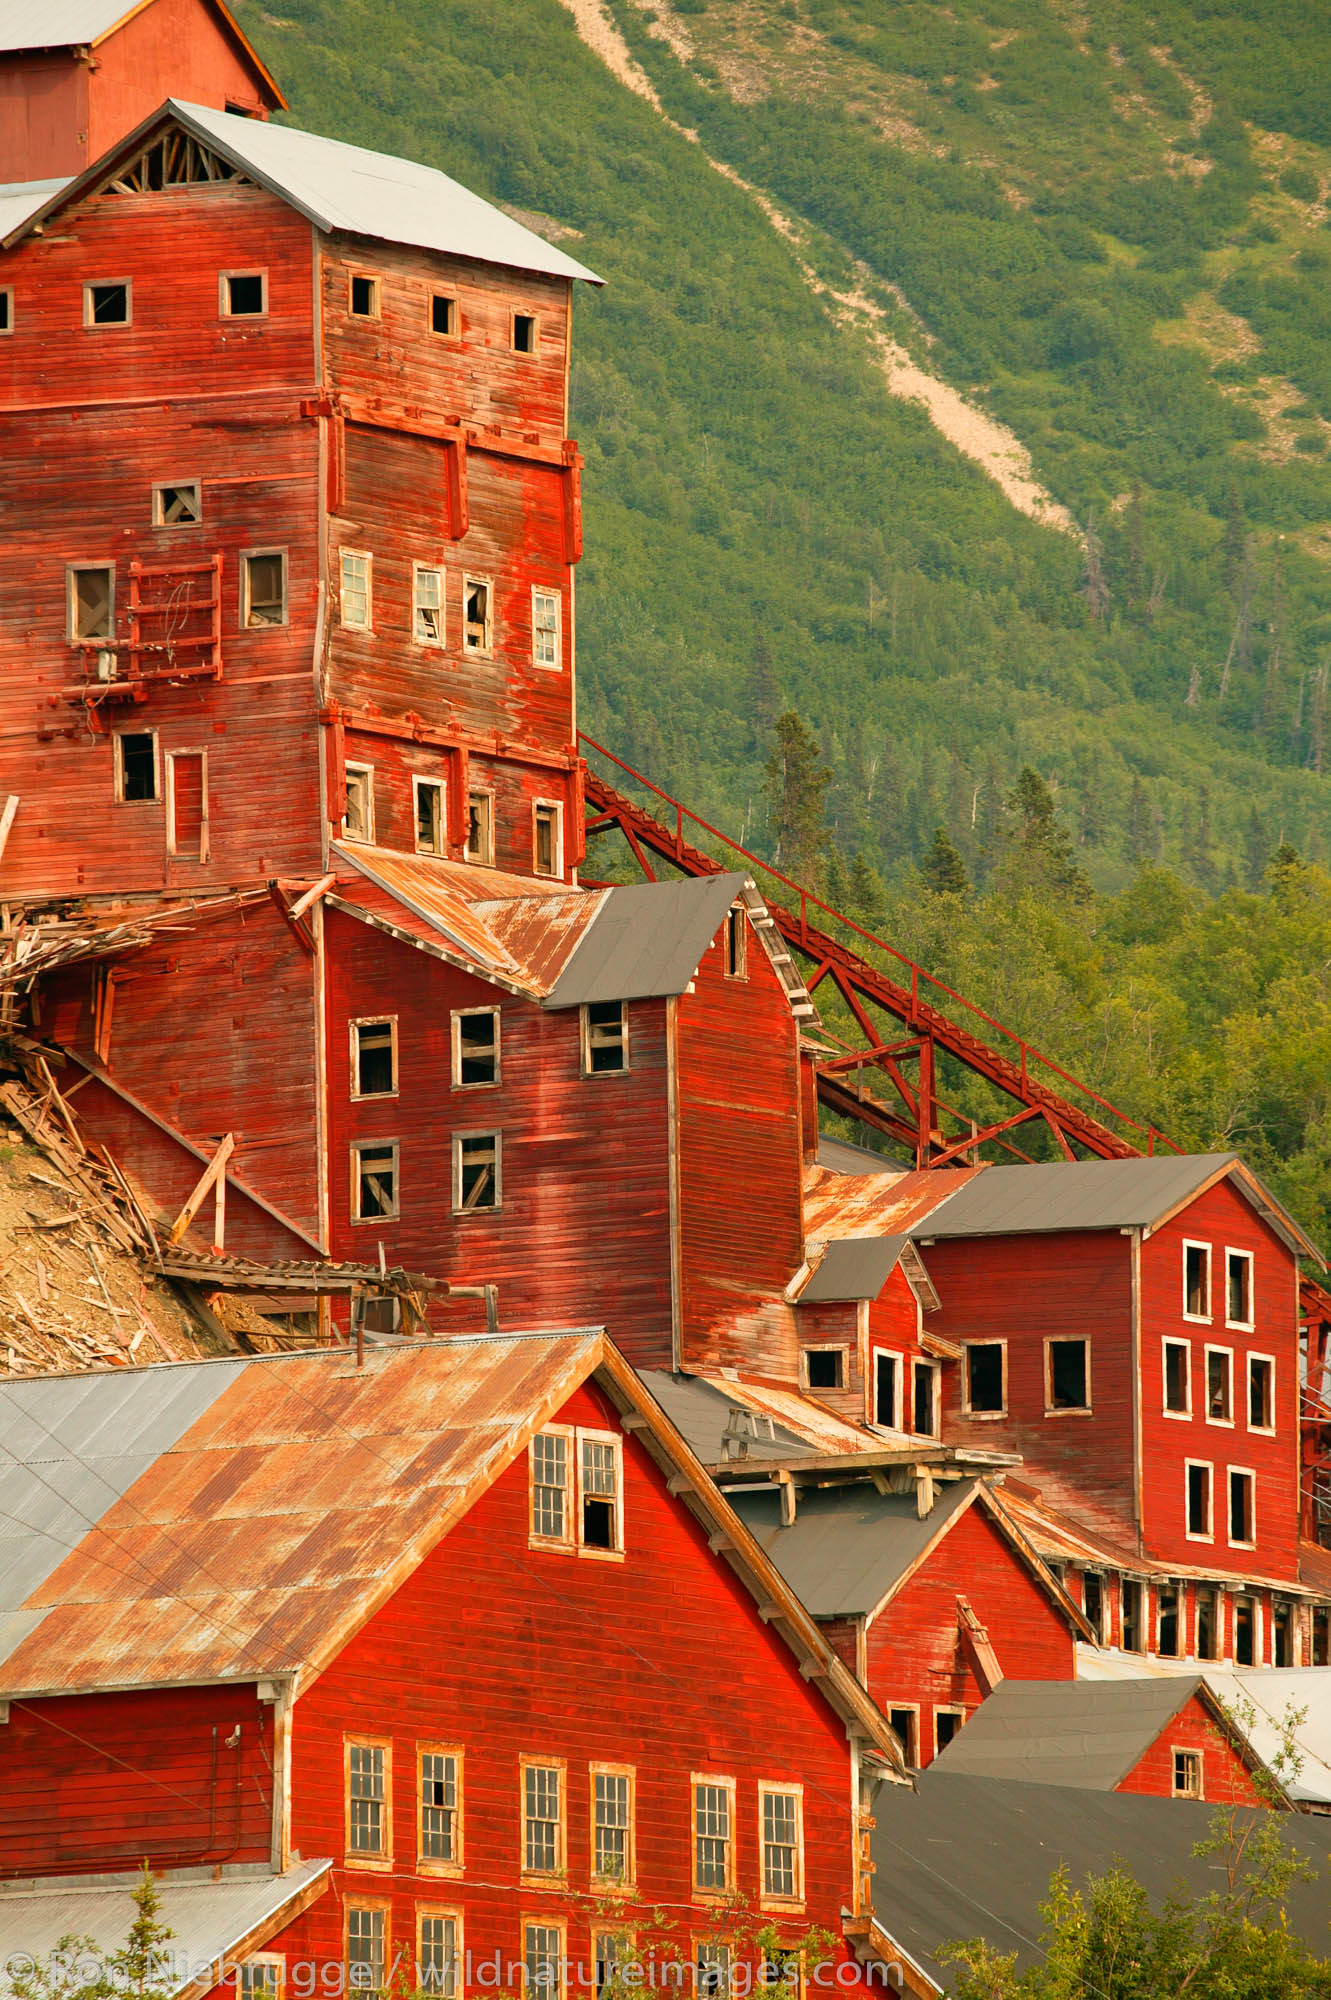 The historic Kennicott Mill built in 1907 by the Kennecott Copper Corporation near McCarthy, Wrangell-St. Elias National Park...